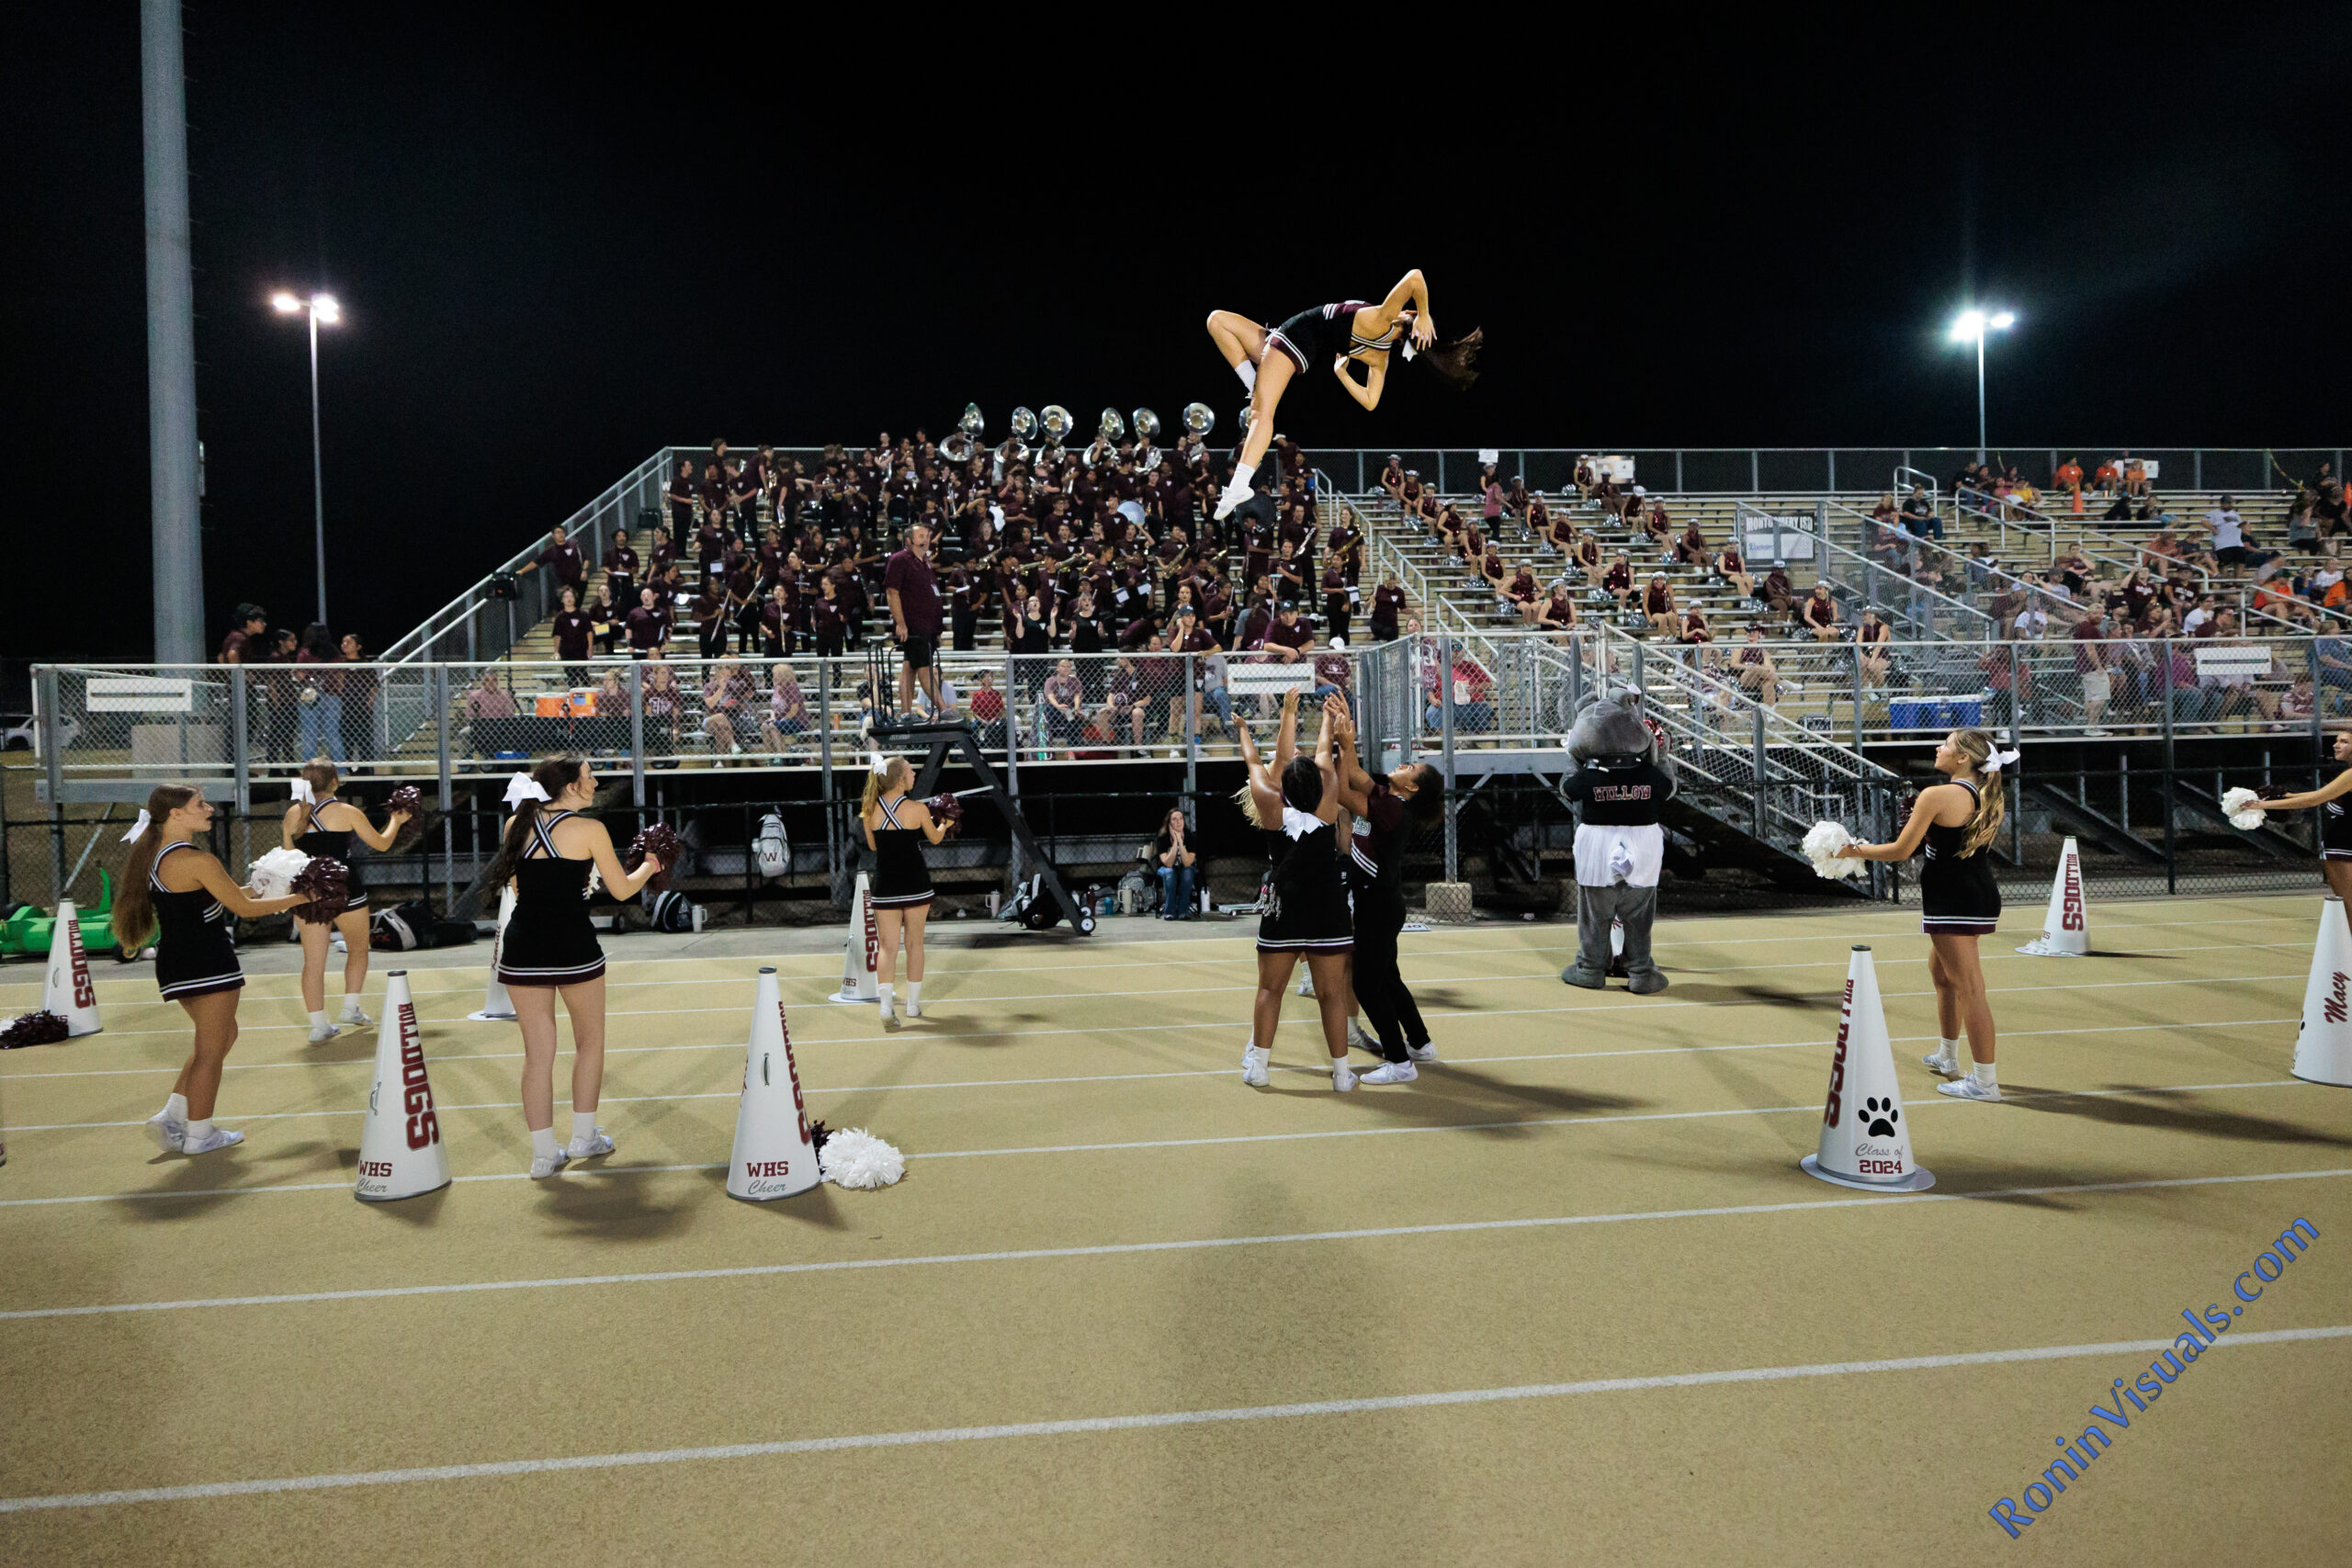 Cheer captain Natalie Barish (midair) performs her "pretty girl" basket toss during the third game of the football season. The Waller Bulldogs got a reality check from one of the top ranked teams in Texas, the Montgomery Lake Creek Lions with a 63-24 decision at Montgomery ISD Athletics Complex, Friday, Sept. 8, 2023. (Photo courtesy RoninVisuals.com)